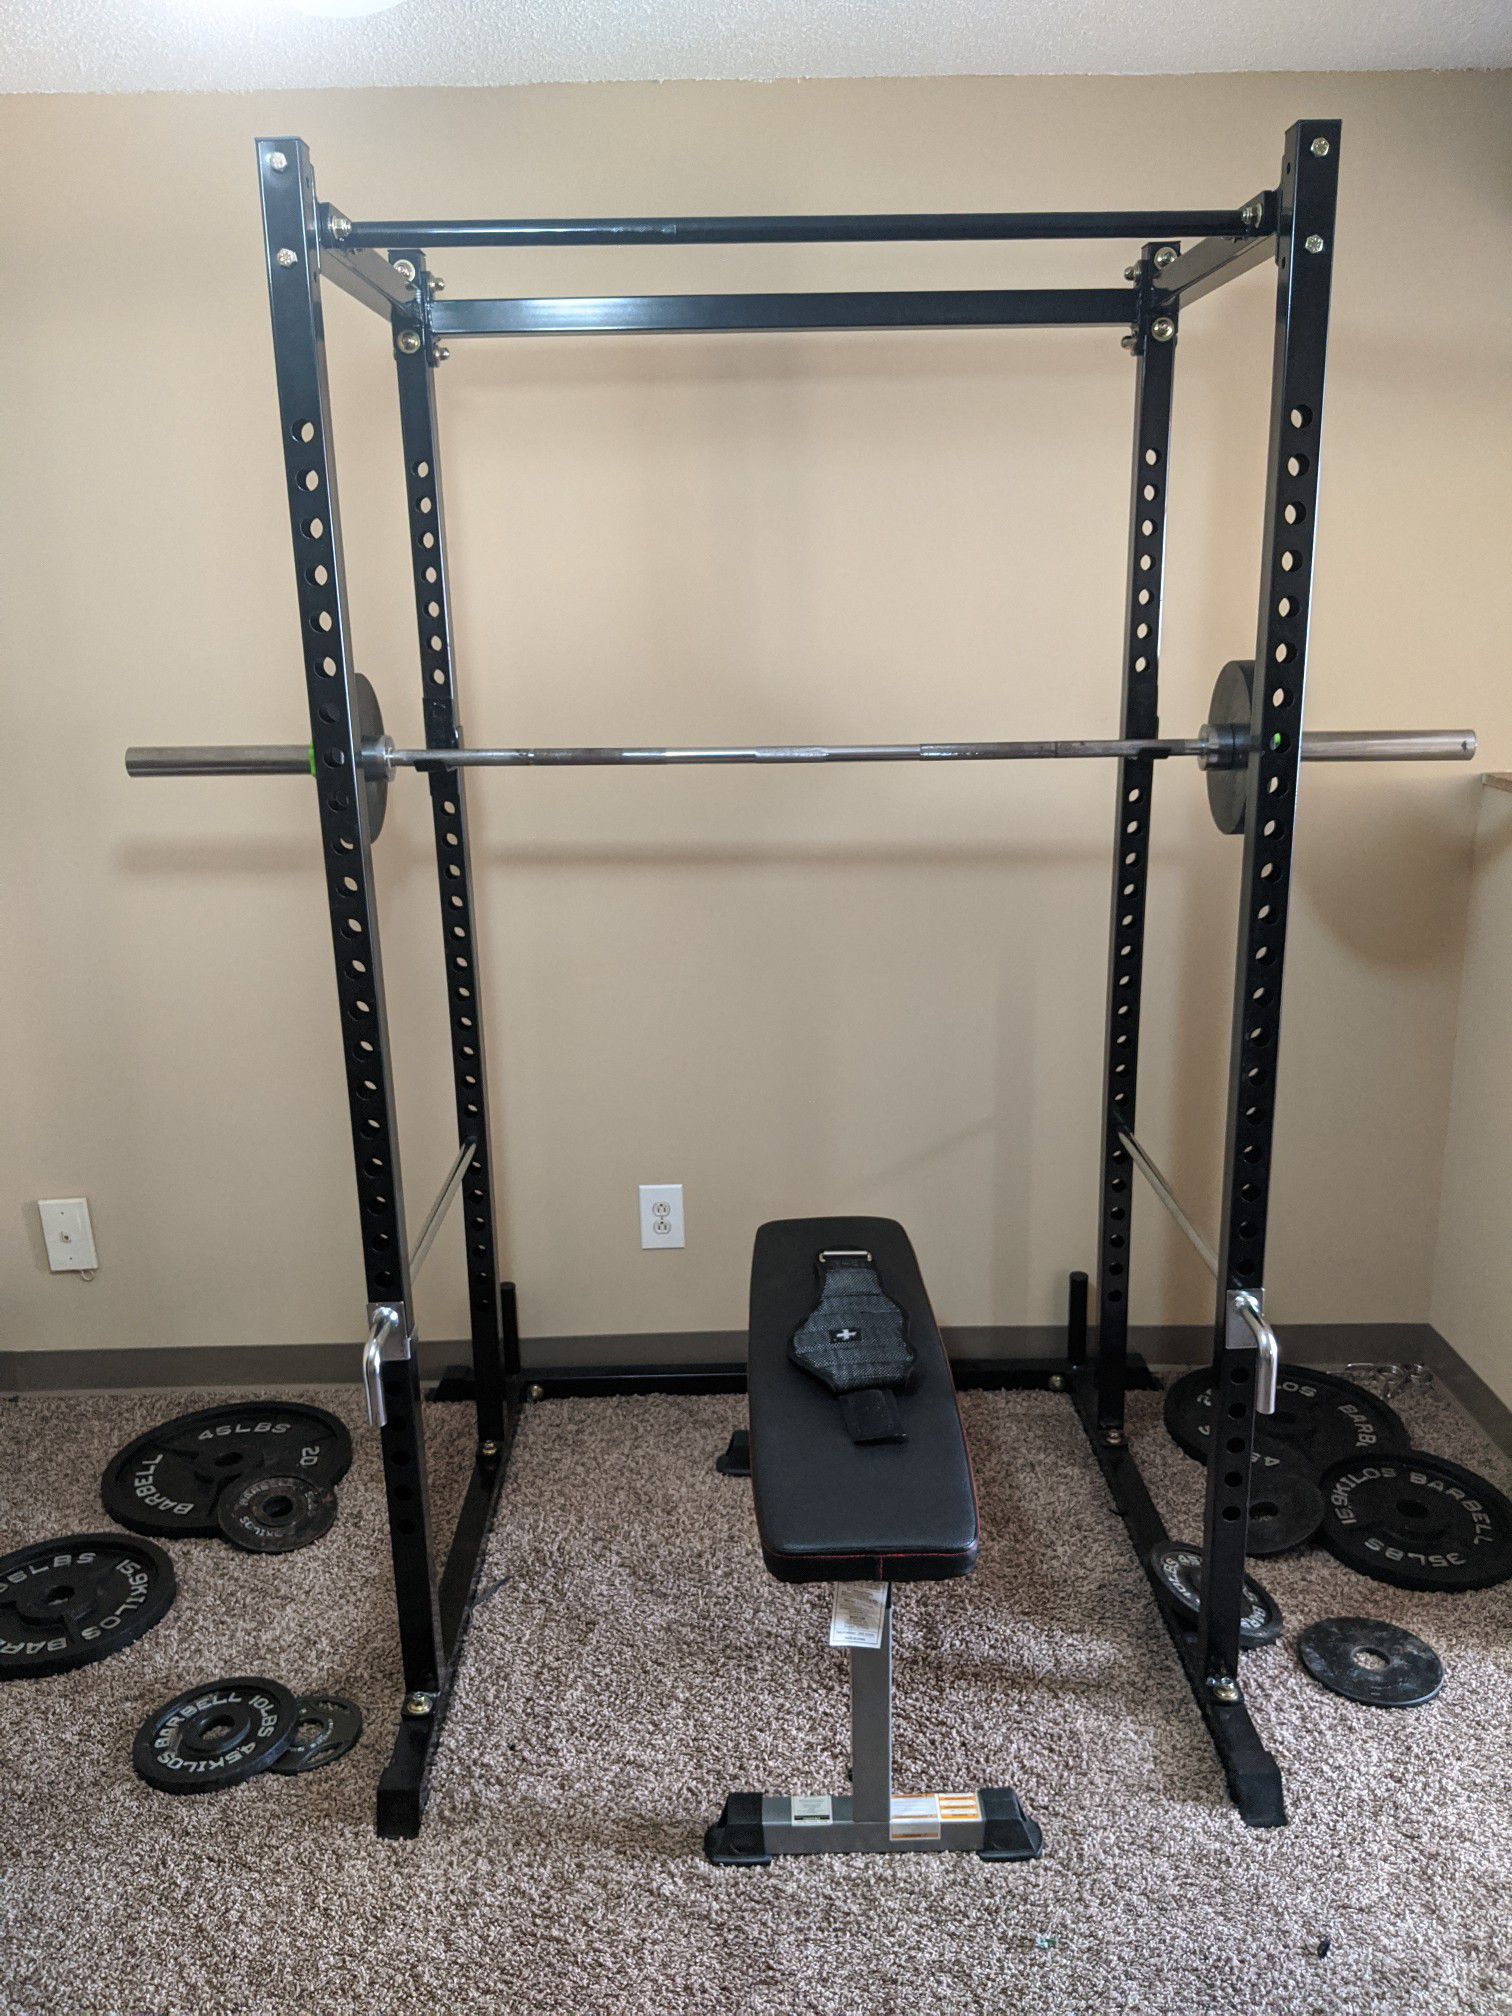 Squat rack with bench, weights, barbell and belt